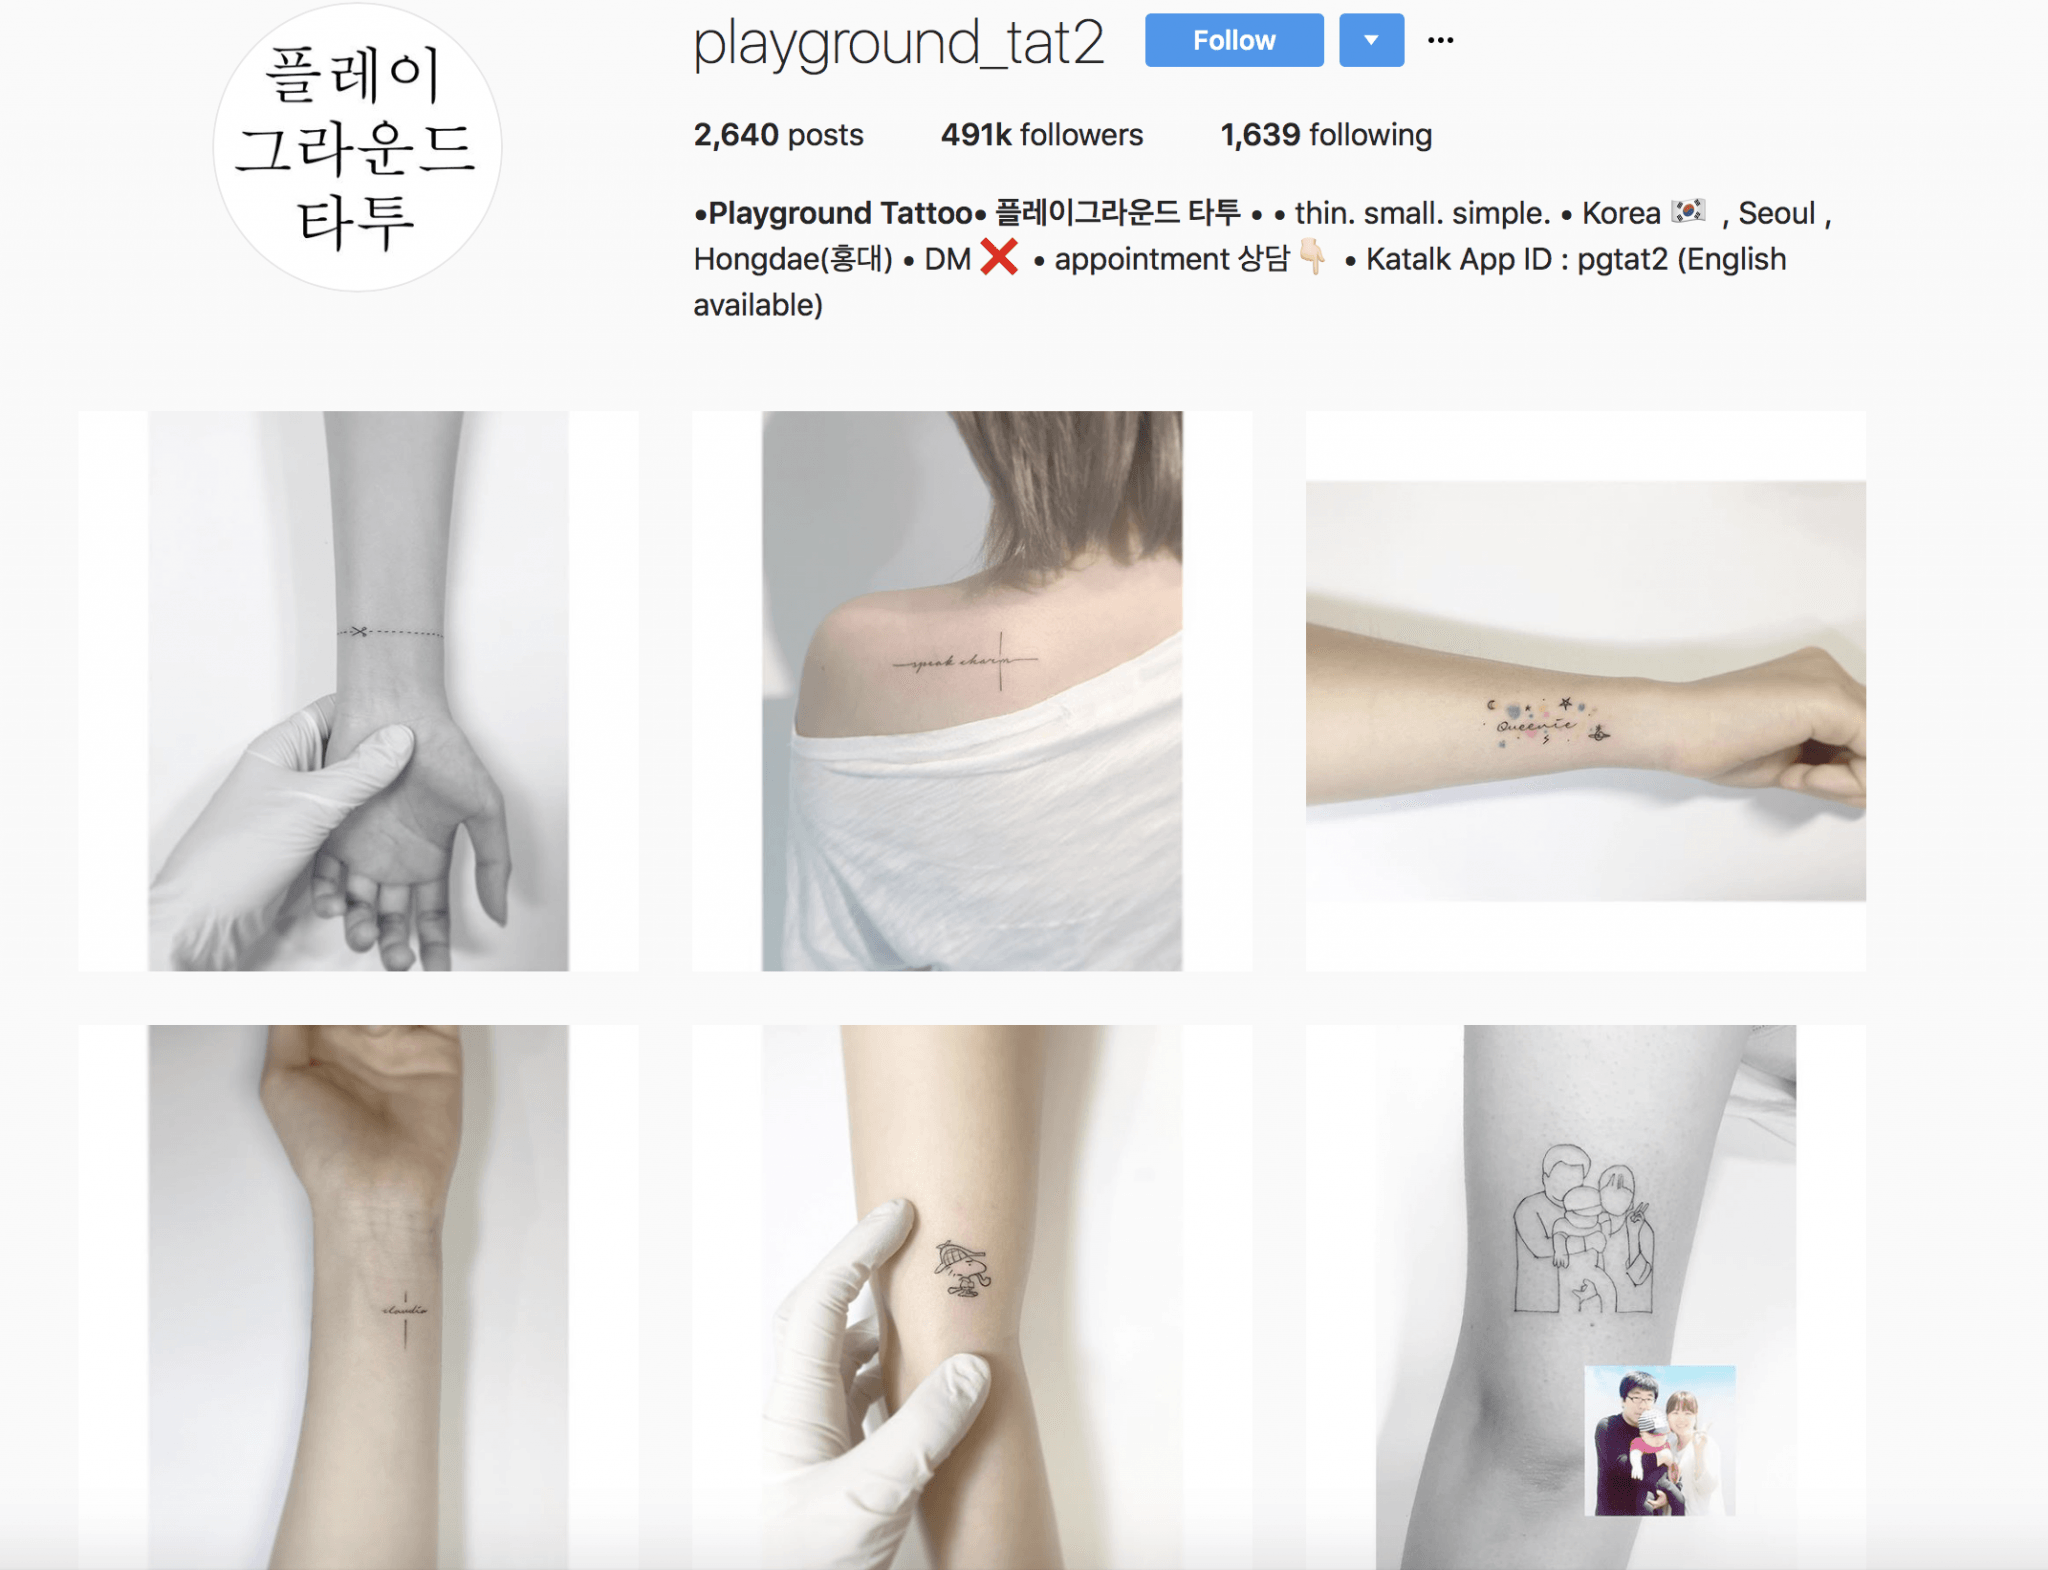 chanyeols tattoos on Twitter it has been exactly a year since Chanyeol  was first seen with the arrow tattoo CHANYEOL EXO LOEY  httpstco7HiXgFm5o1  Twitter